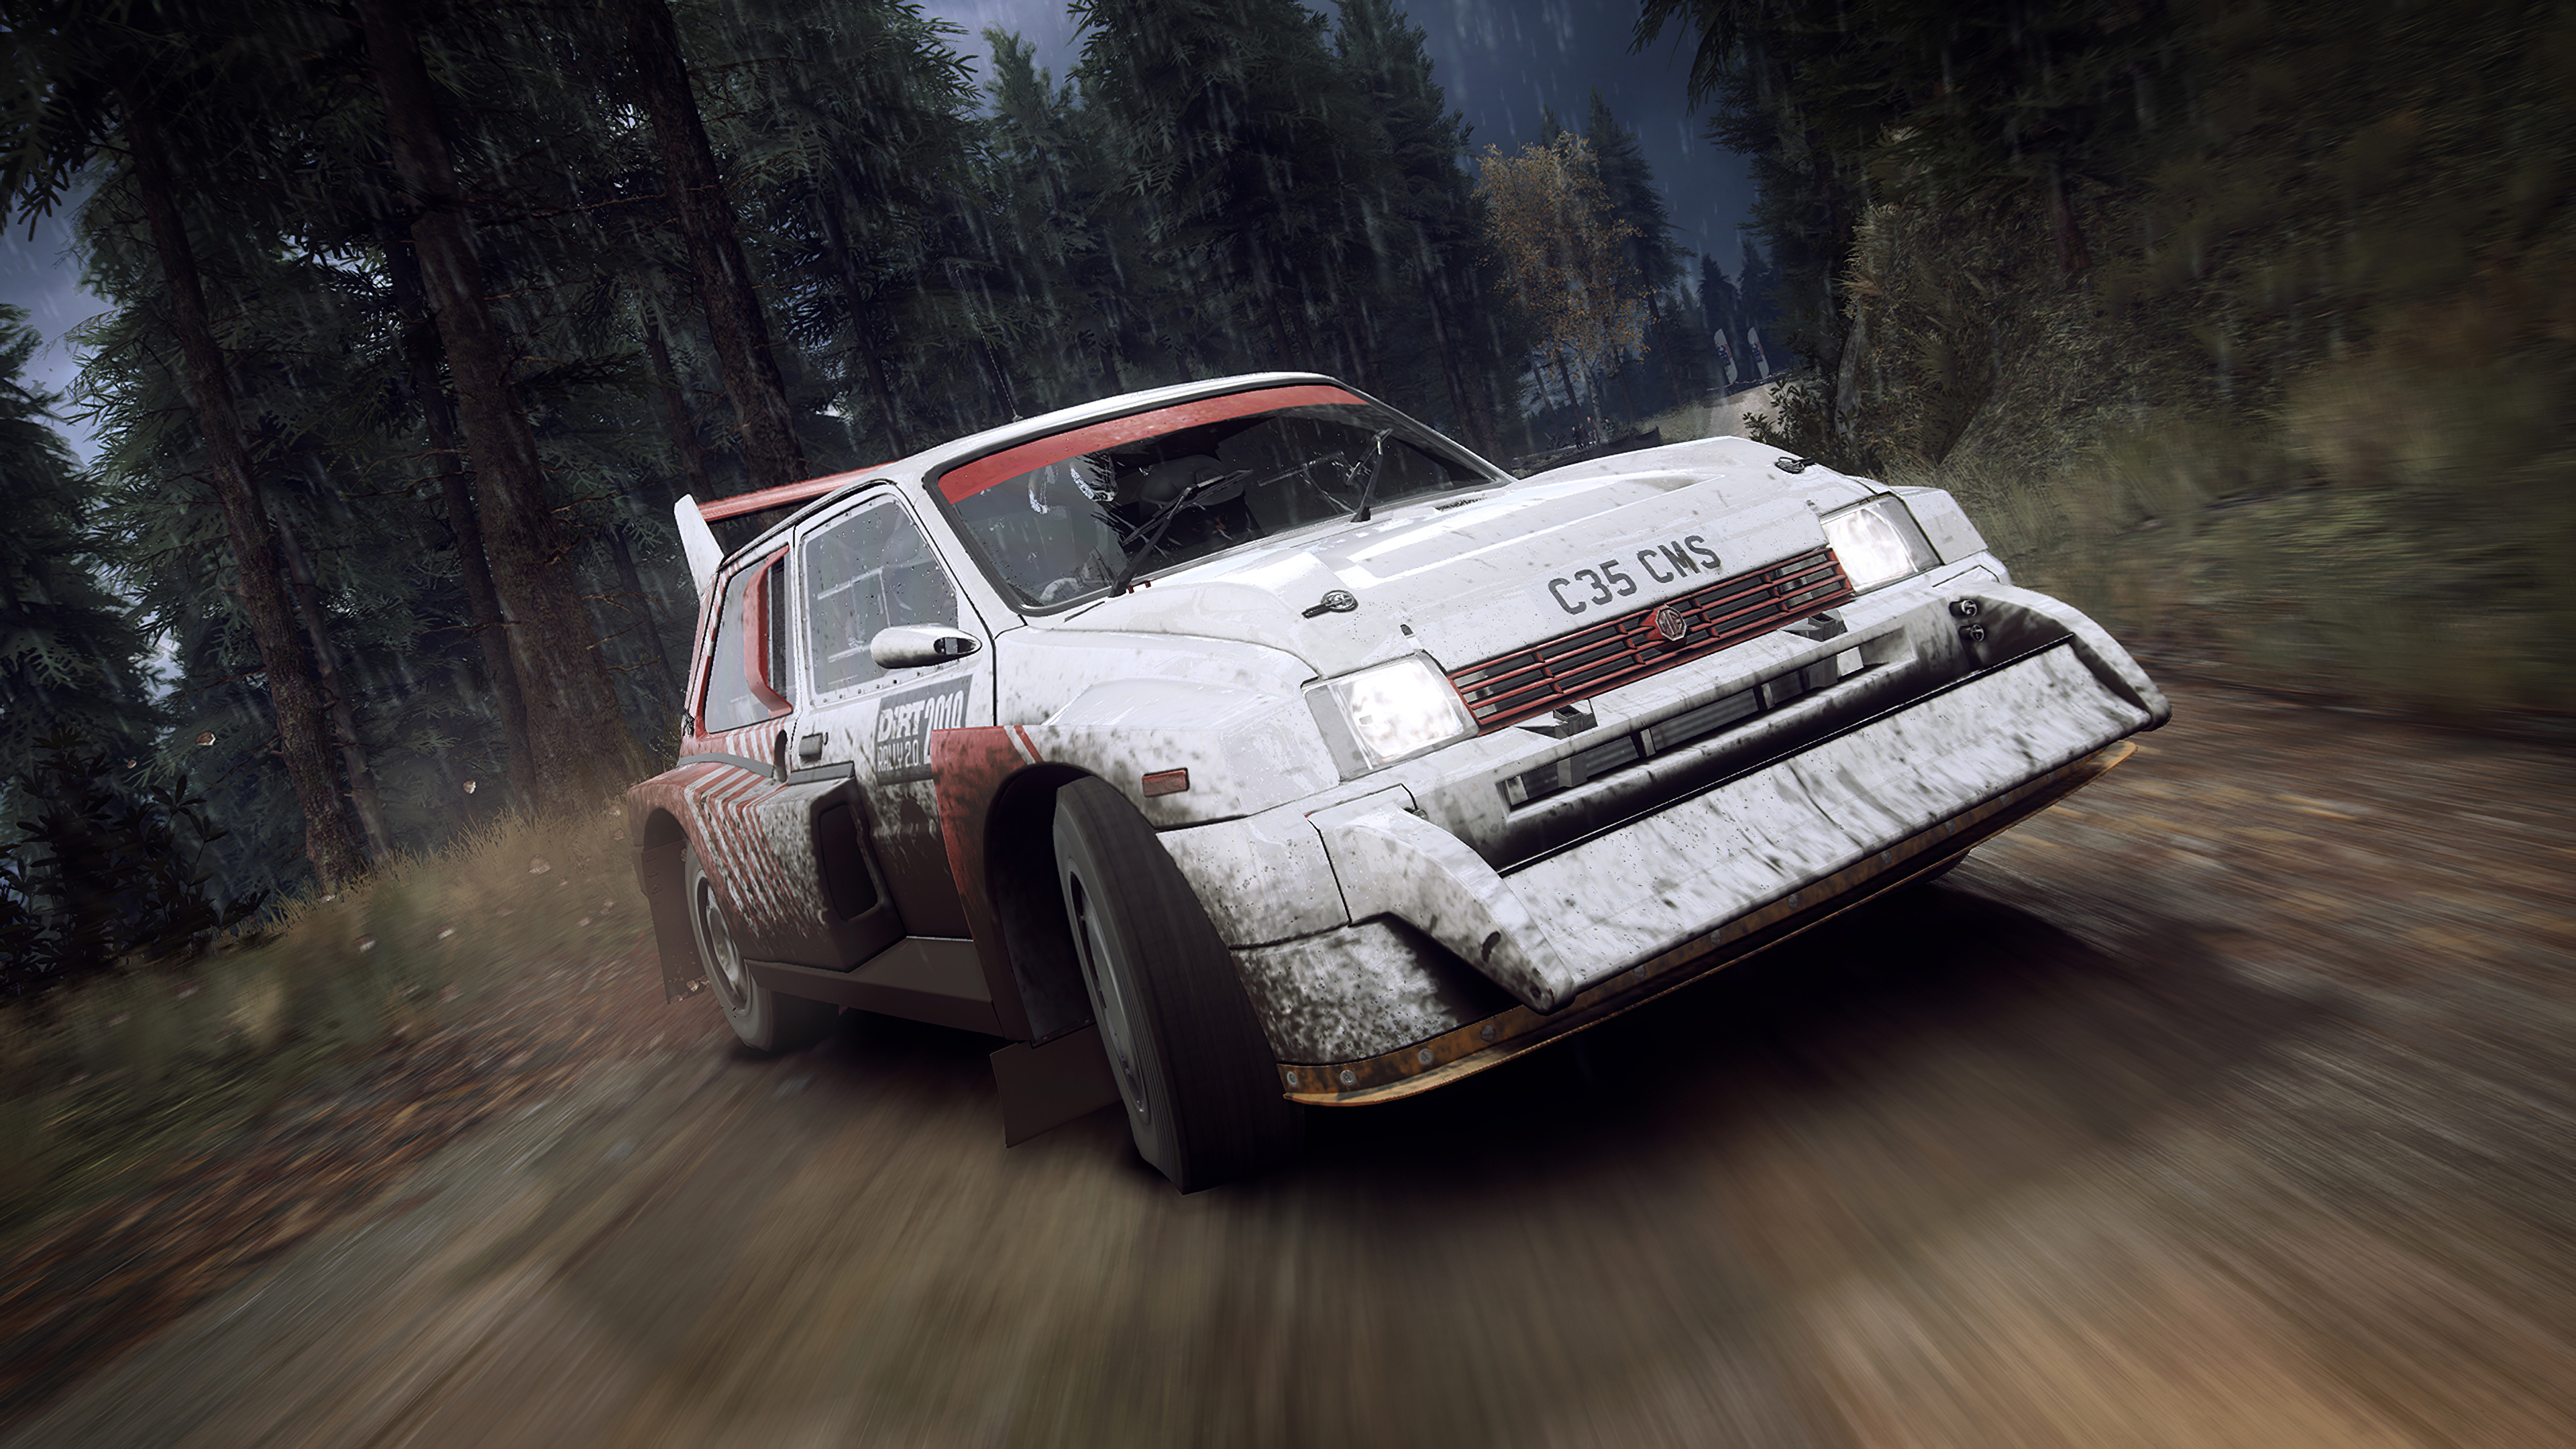 Rallycross: Drifting, Slippery Road, Forest Track, Reinforced Hood, Protective Bumper and Fenders, Mobile Game. 3840x2160 4K Background.